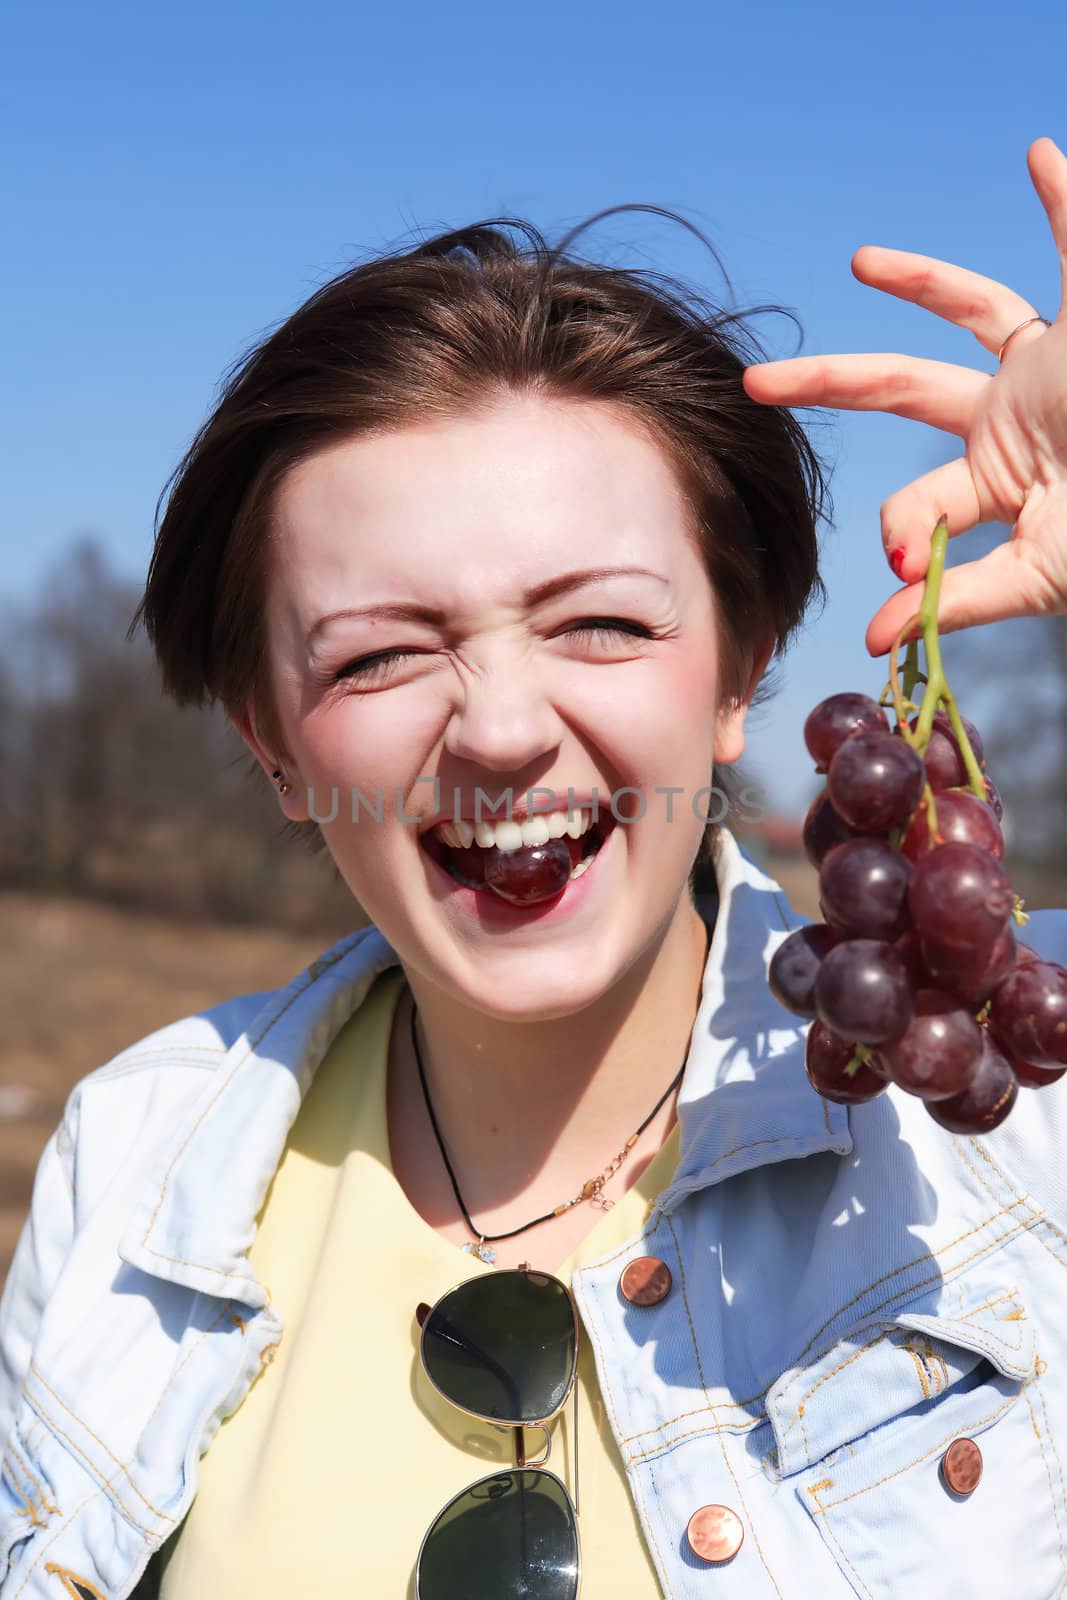 Beautiful young girl eating red grapes outdoor on blue sky background